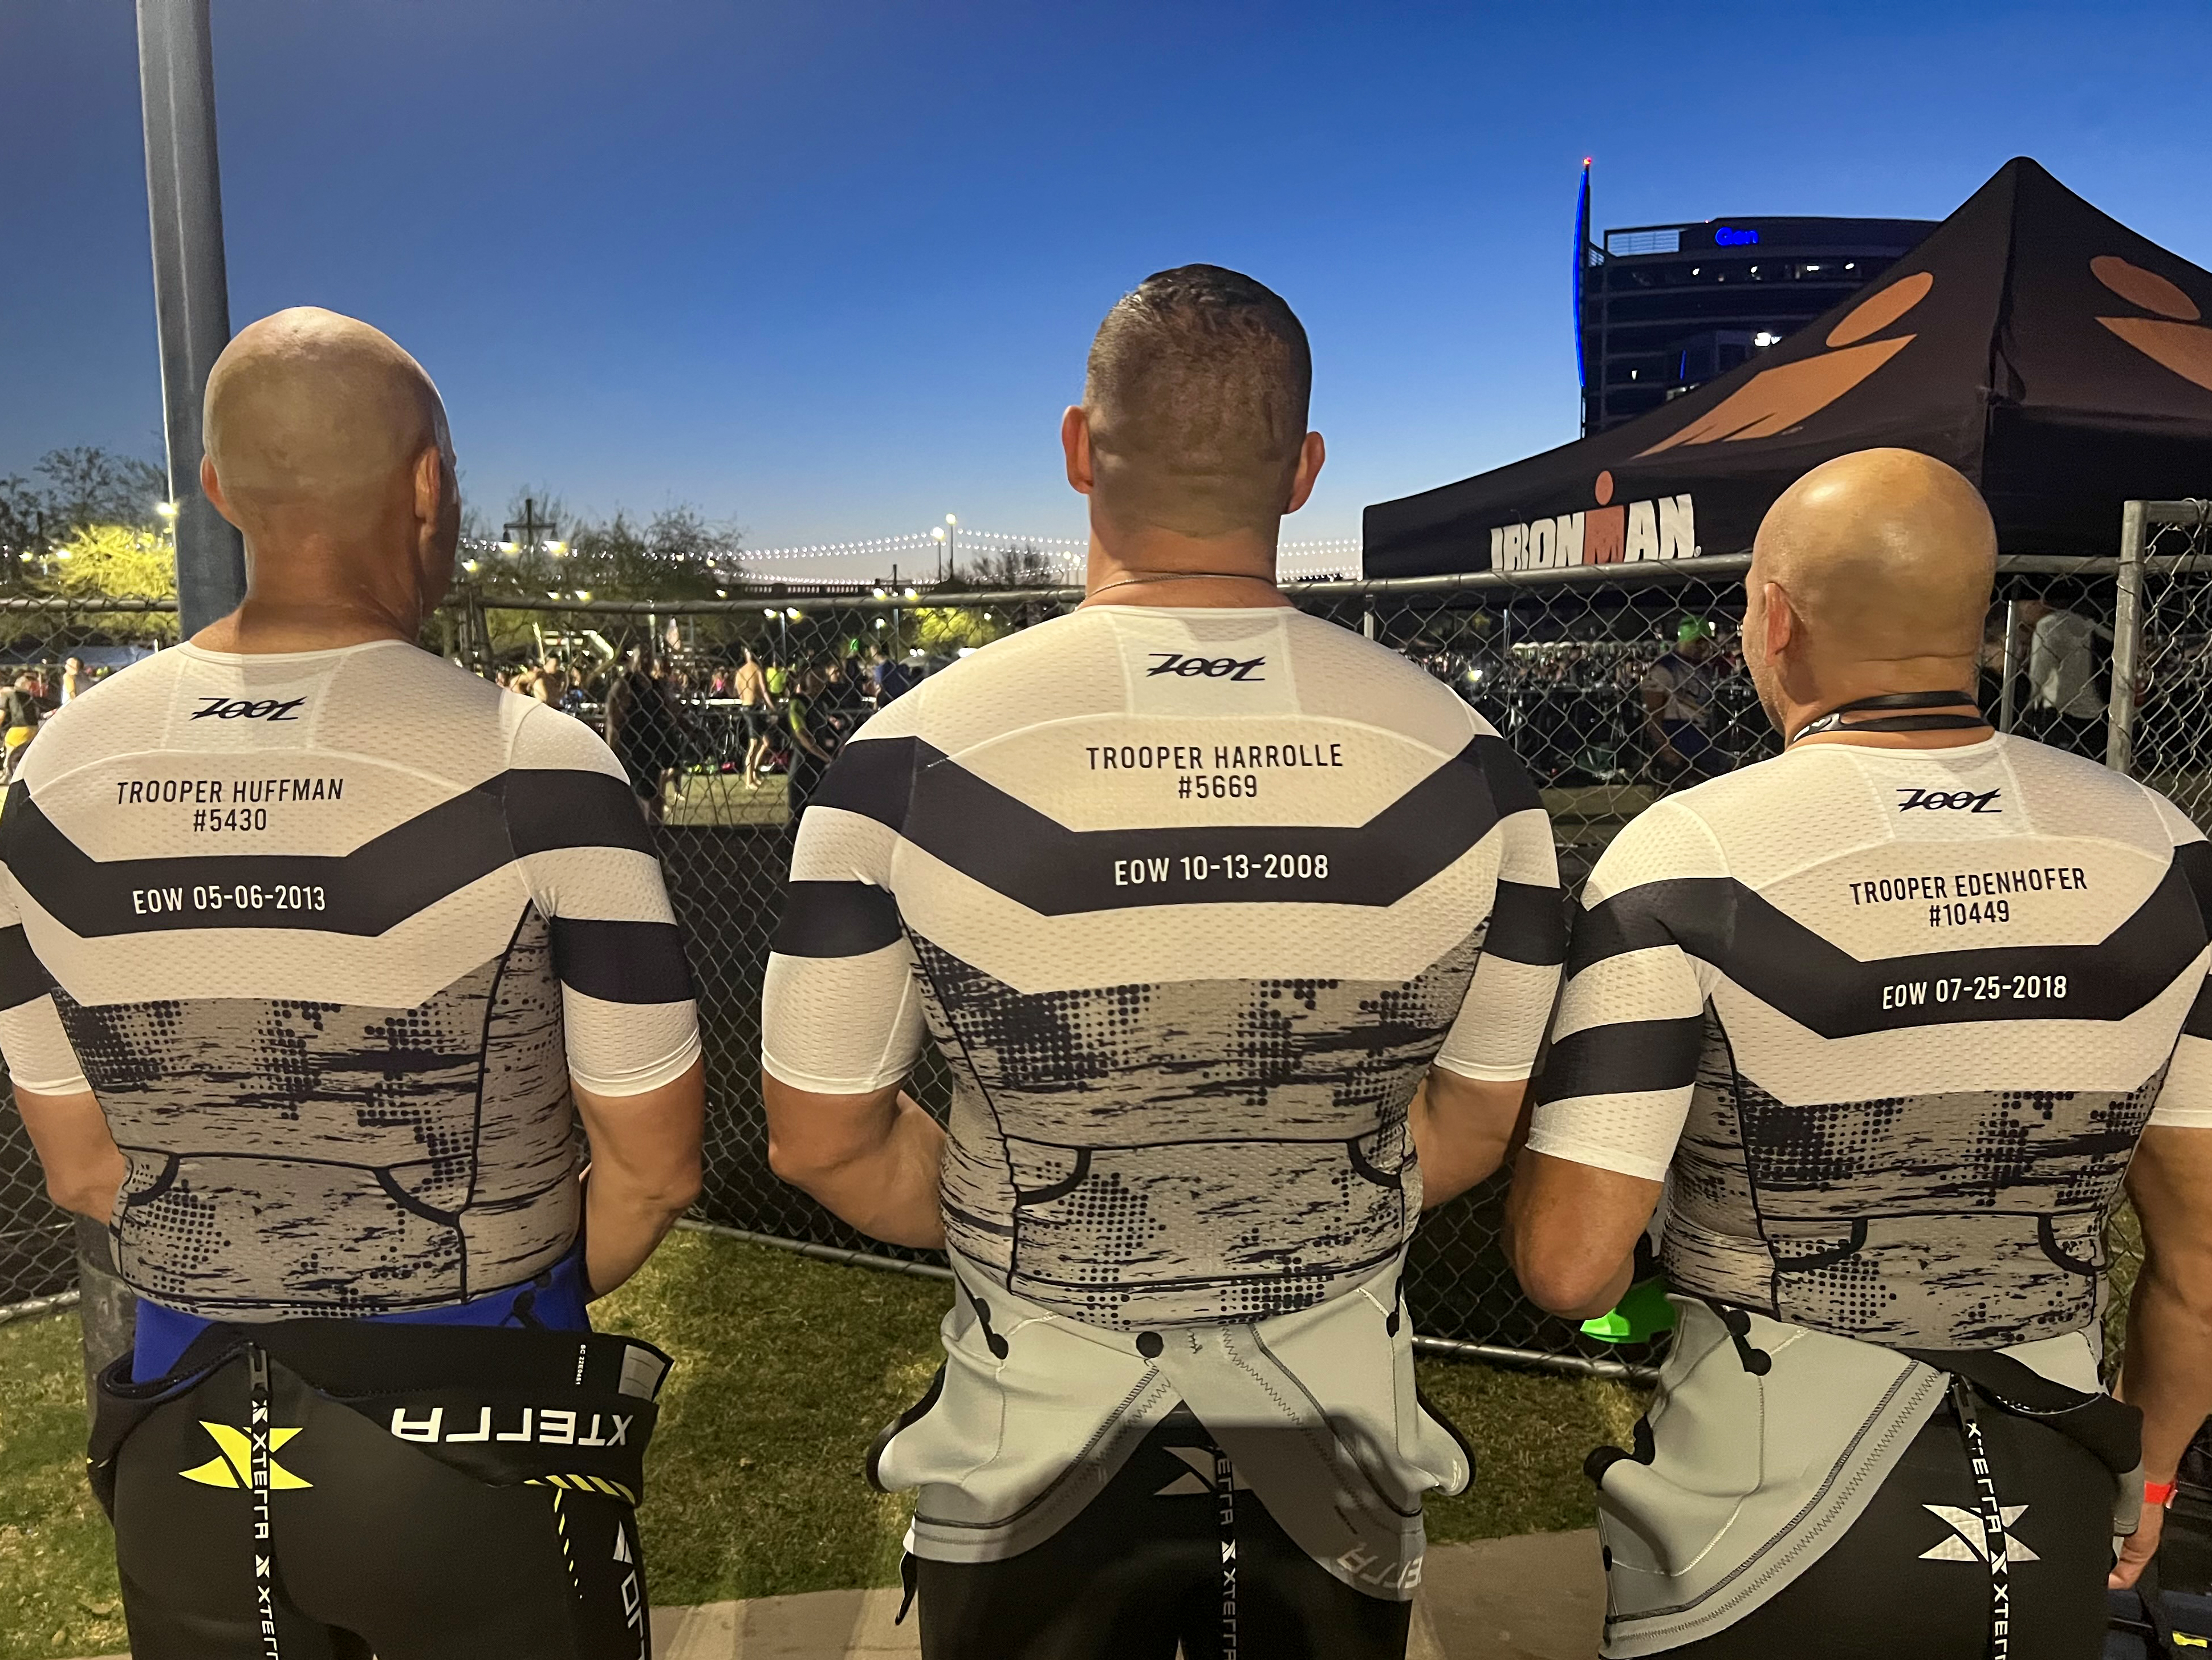 Sergeant Christie, Sergeant Covert and Sergeant Coughlin show the names of fallen AZDPS heroes on the back of their Ironman jerseys